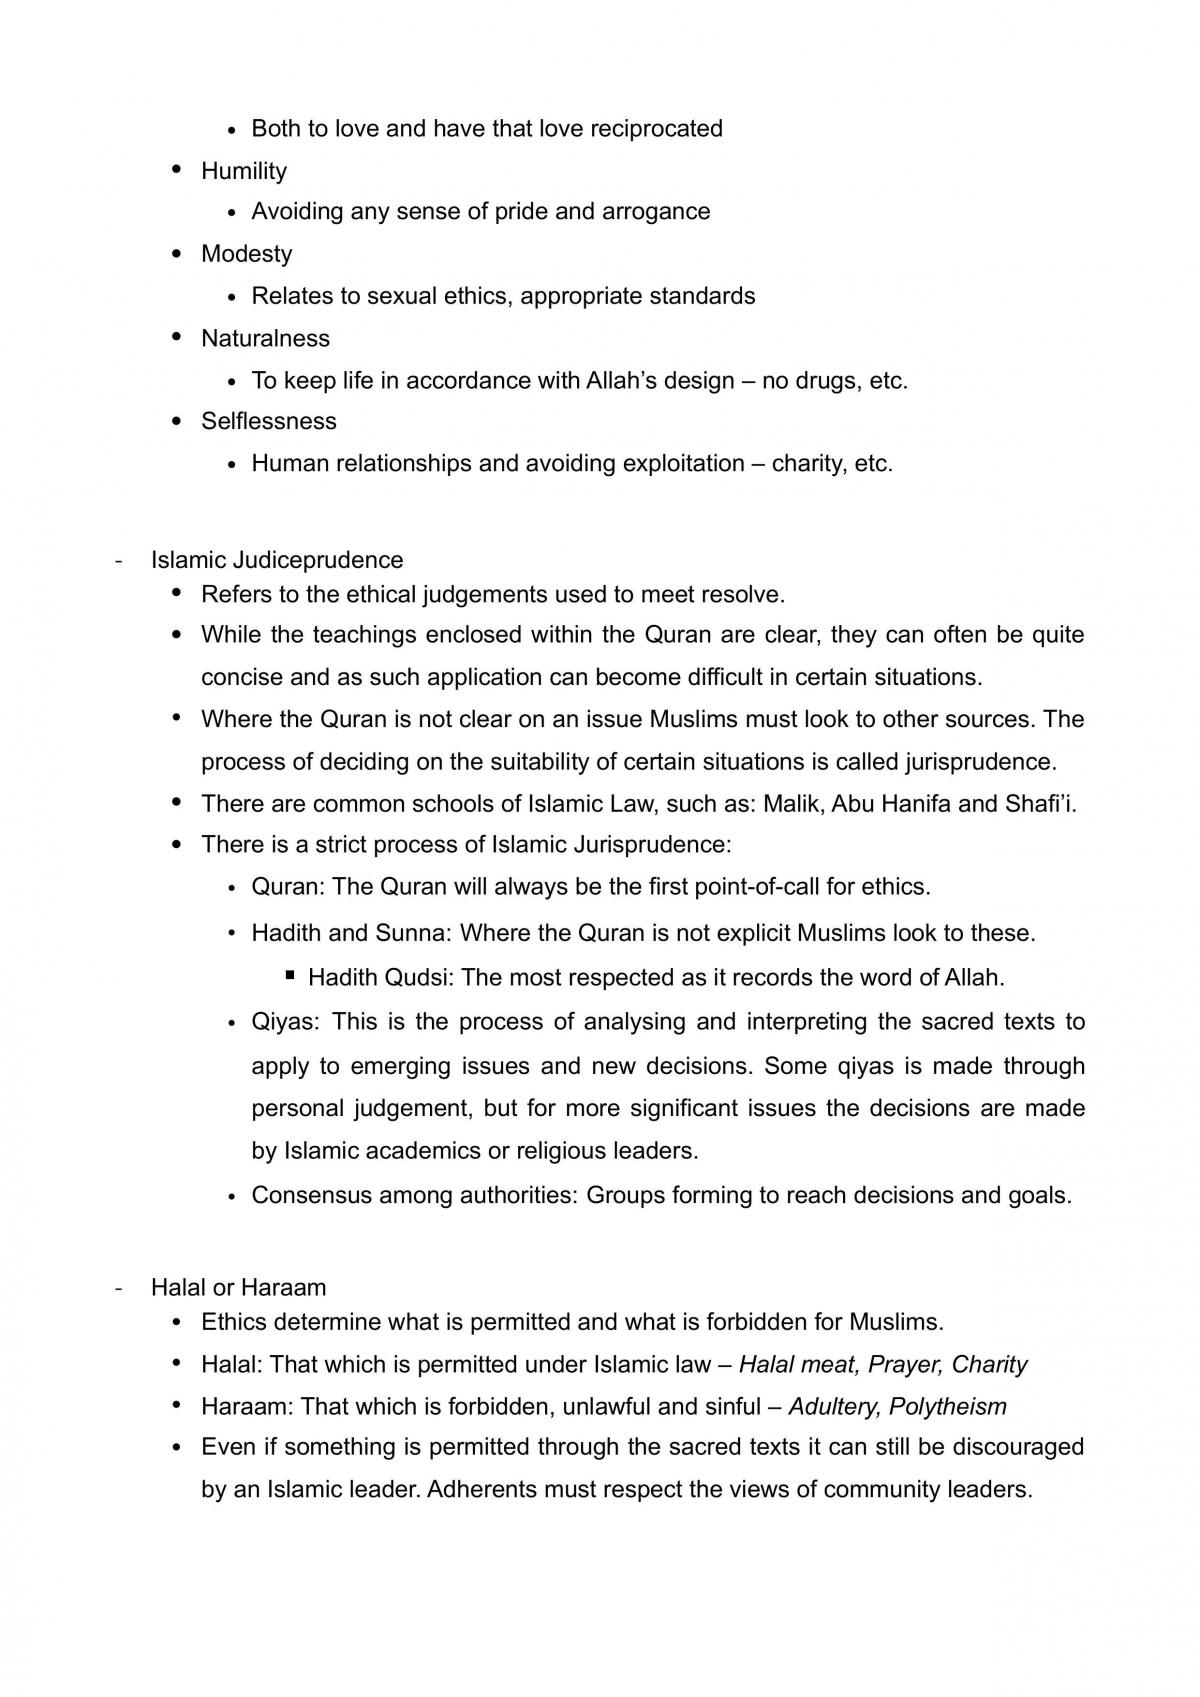 SOR 1 Full Subject Notes Prelim - Page 17